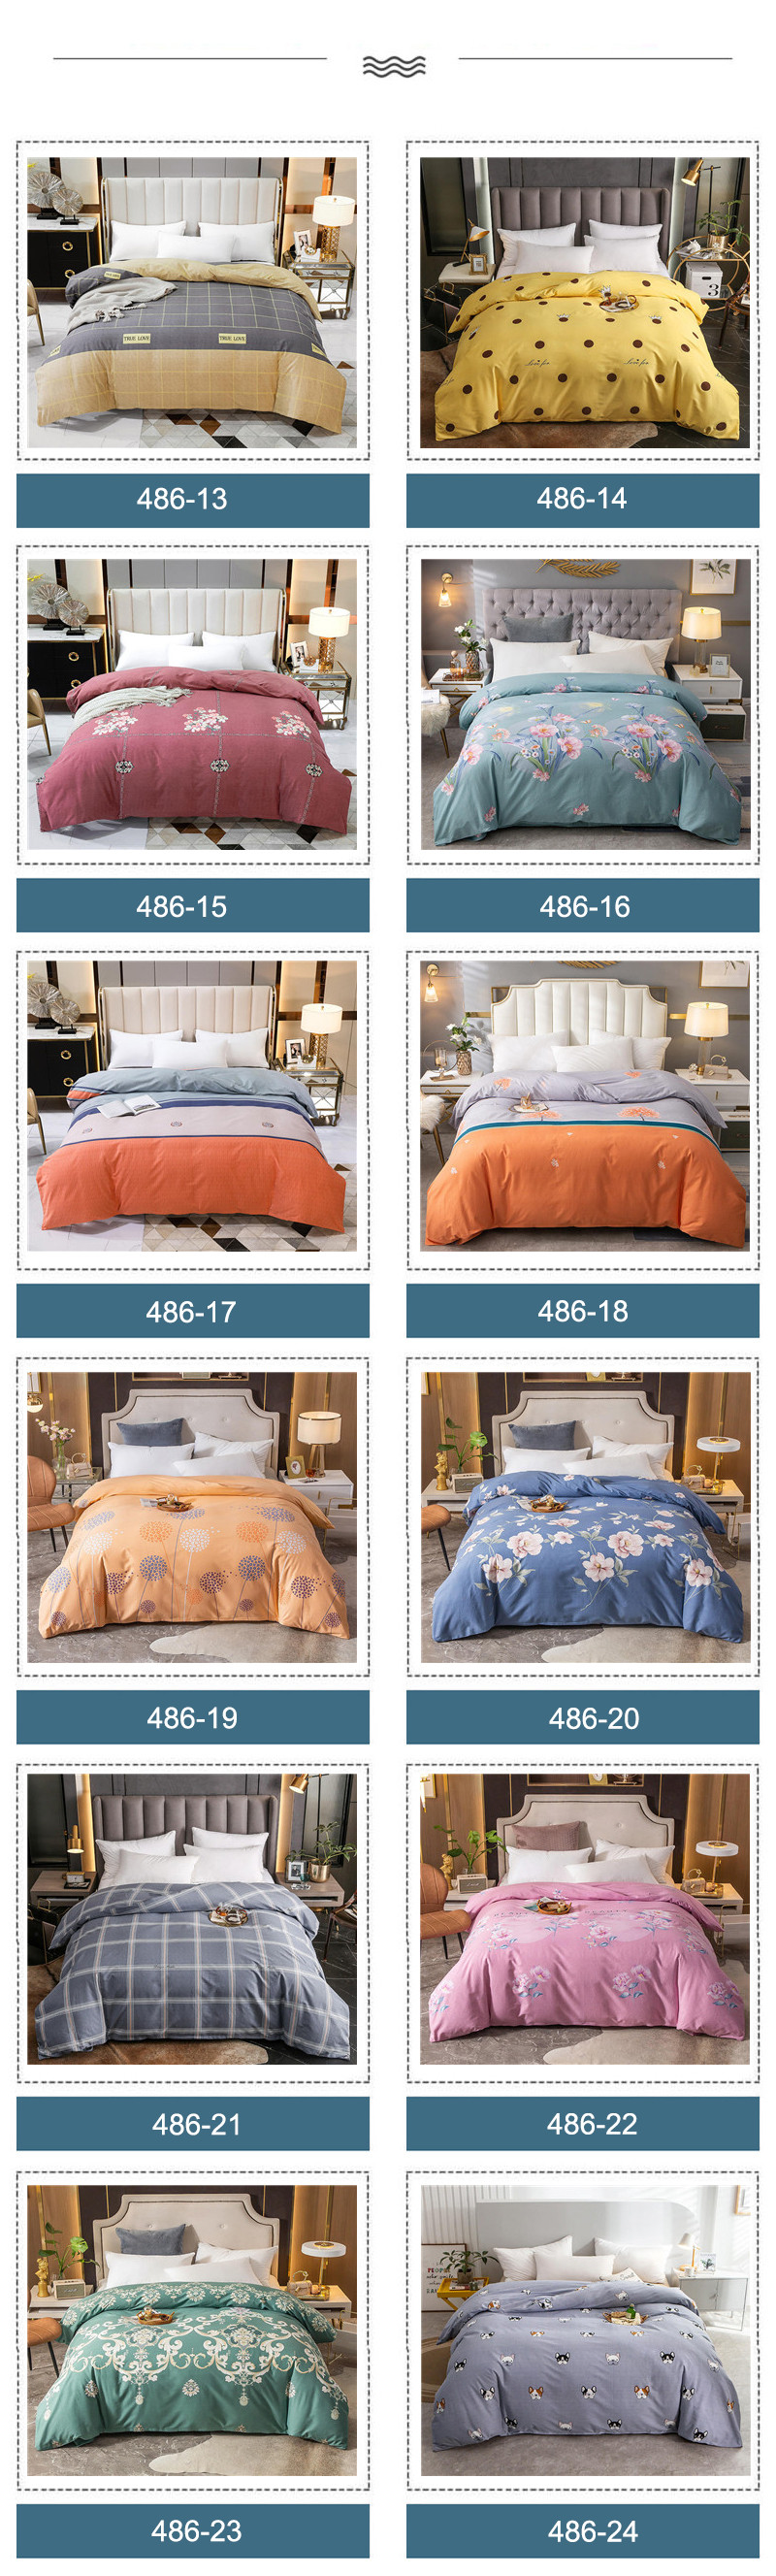 Low Price Home Sateen Sheets